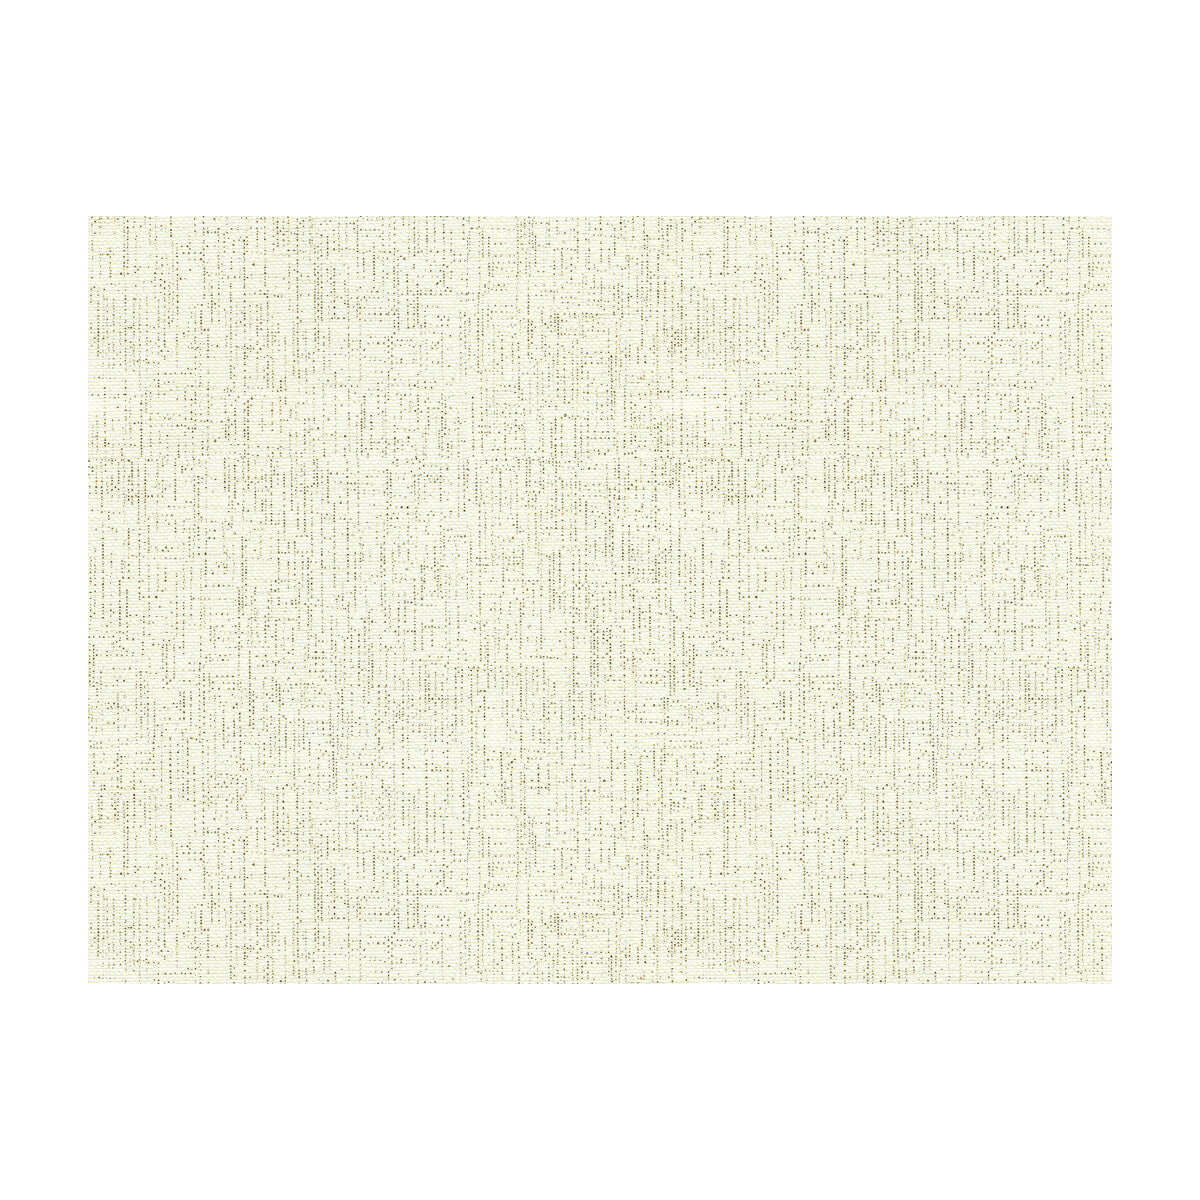 Kravet Basics fabric in 33198-416 color - pattern 33198.416.0 - by Kravet Basics in the Perfect Plains collection